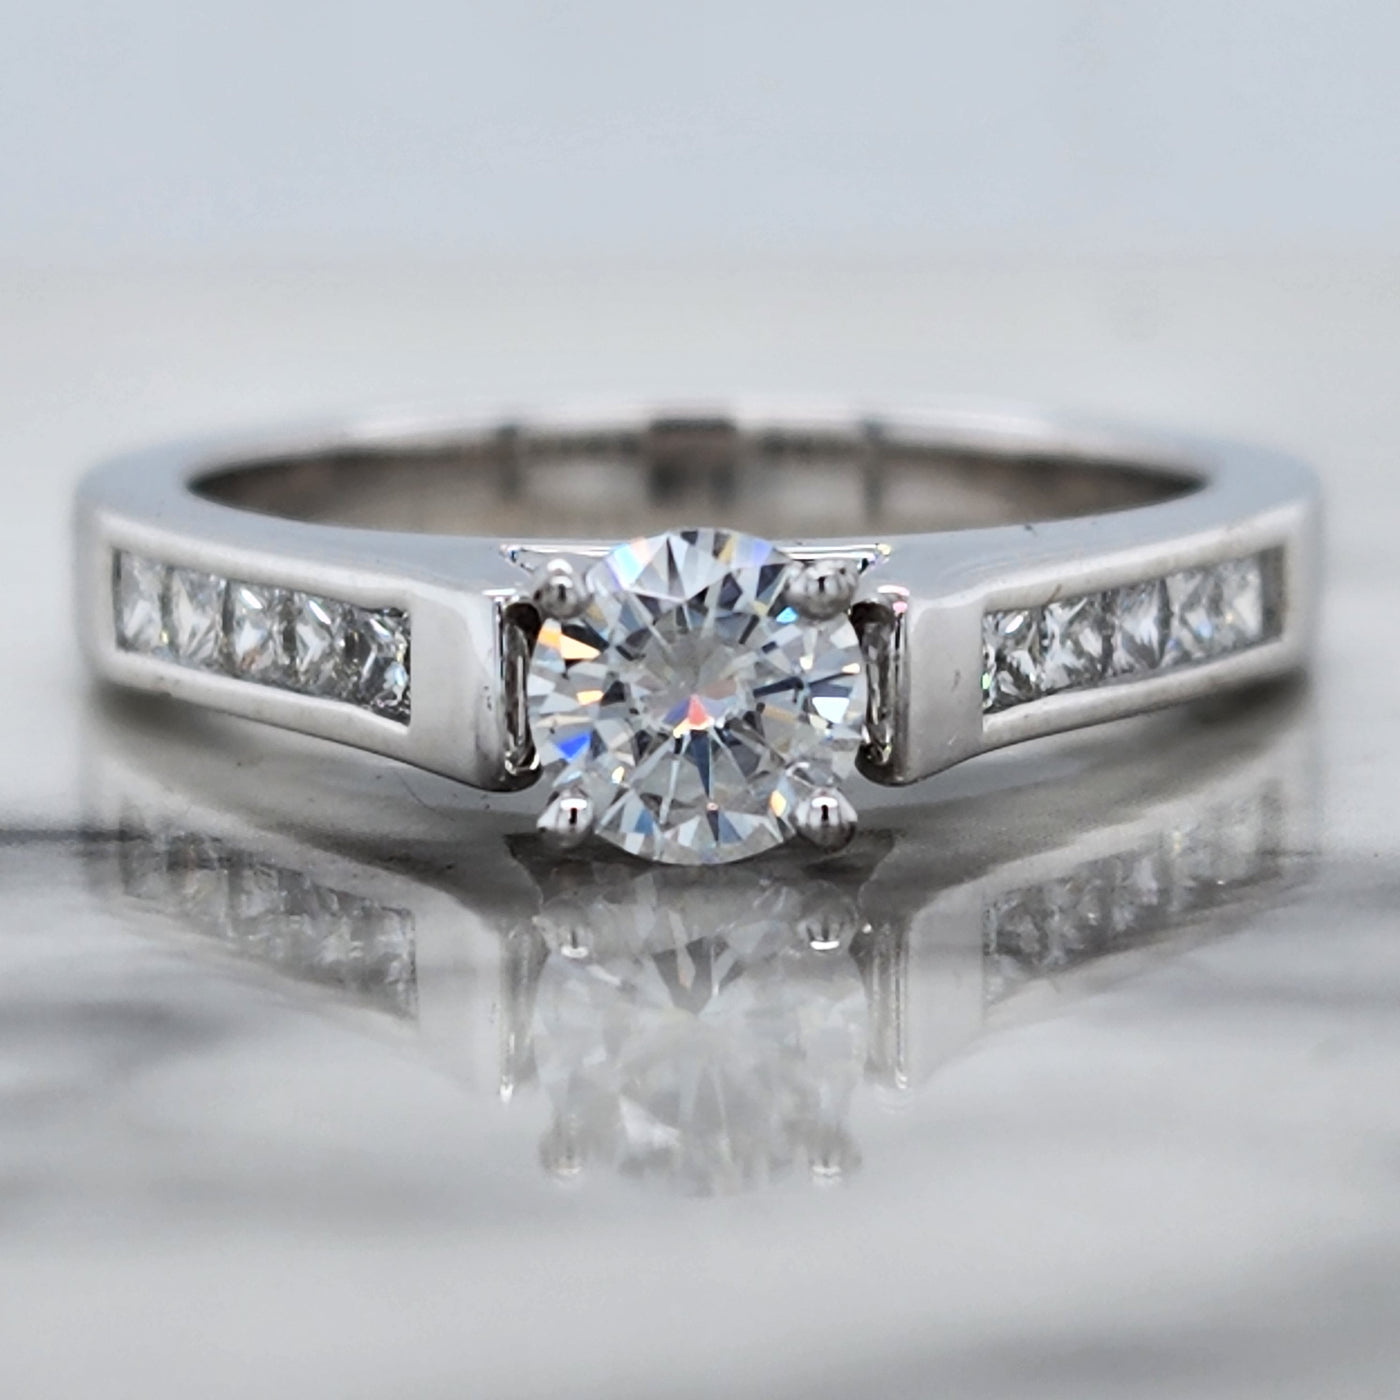 White Gold Engagement Ring With Round Diamond and Channel Set Princess Cut Accents